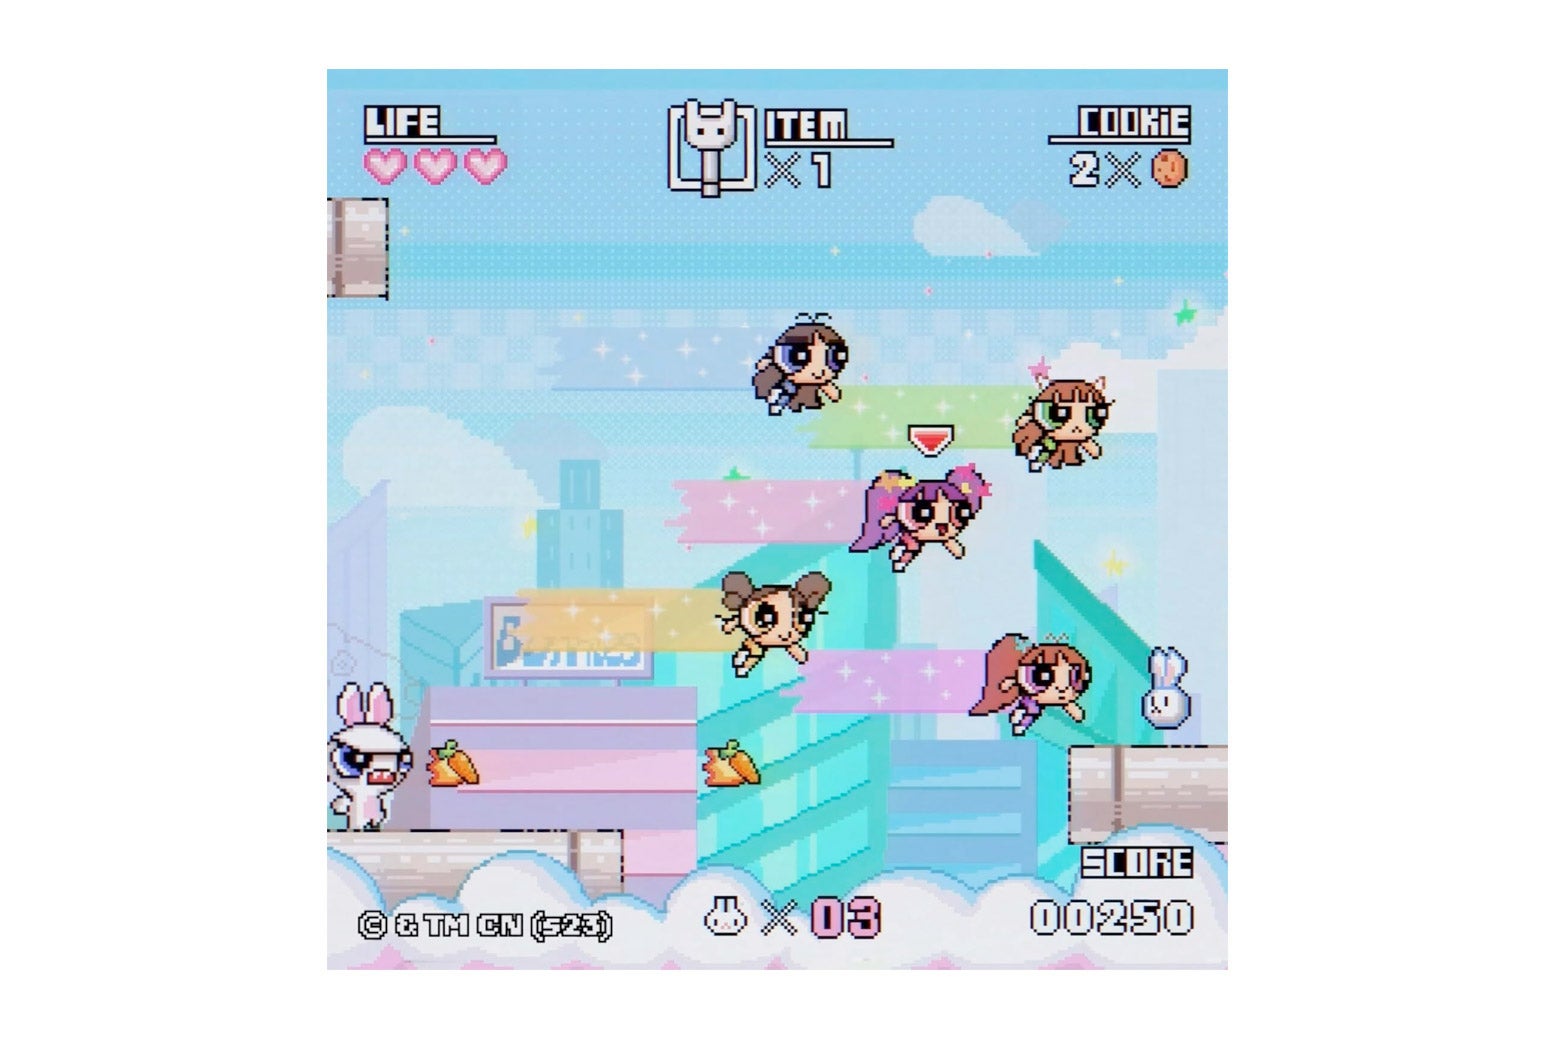 Album art showing what looks like a PowerPuff girls video game except the five characters are NewJeans